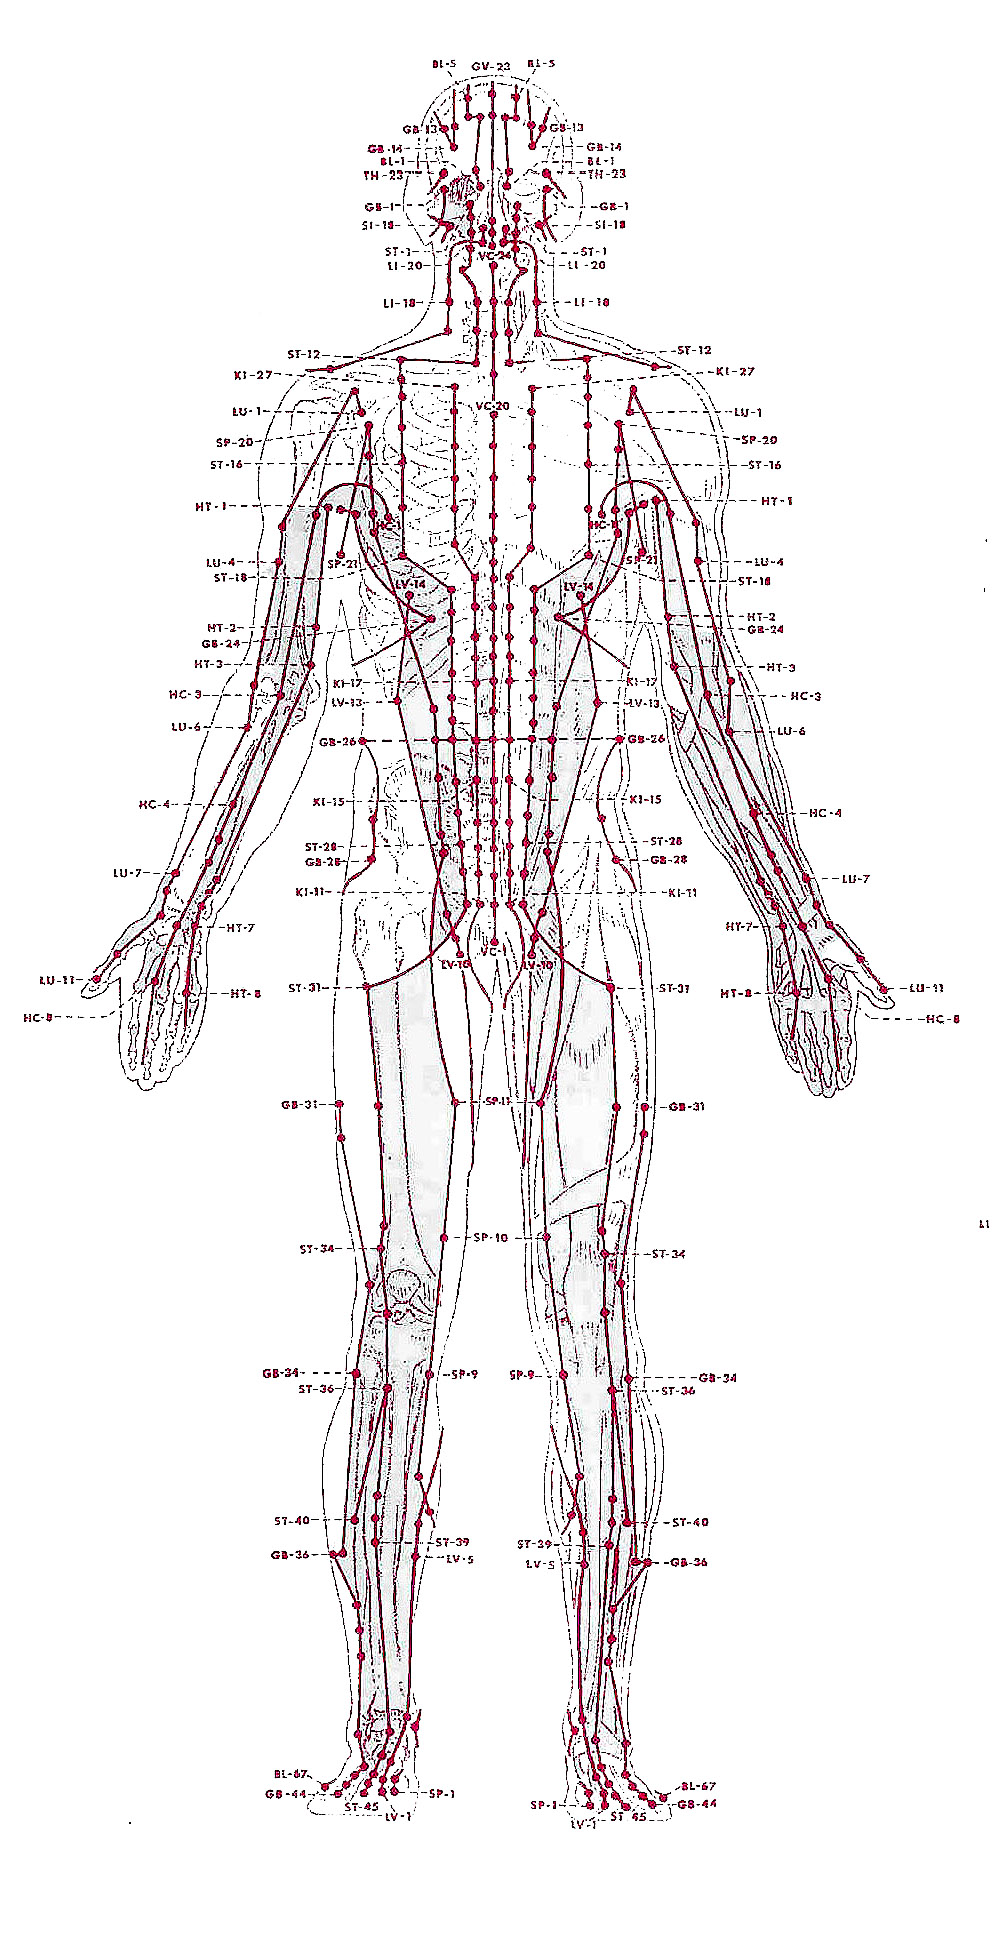 Diagram of acupuncture points